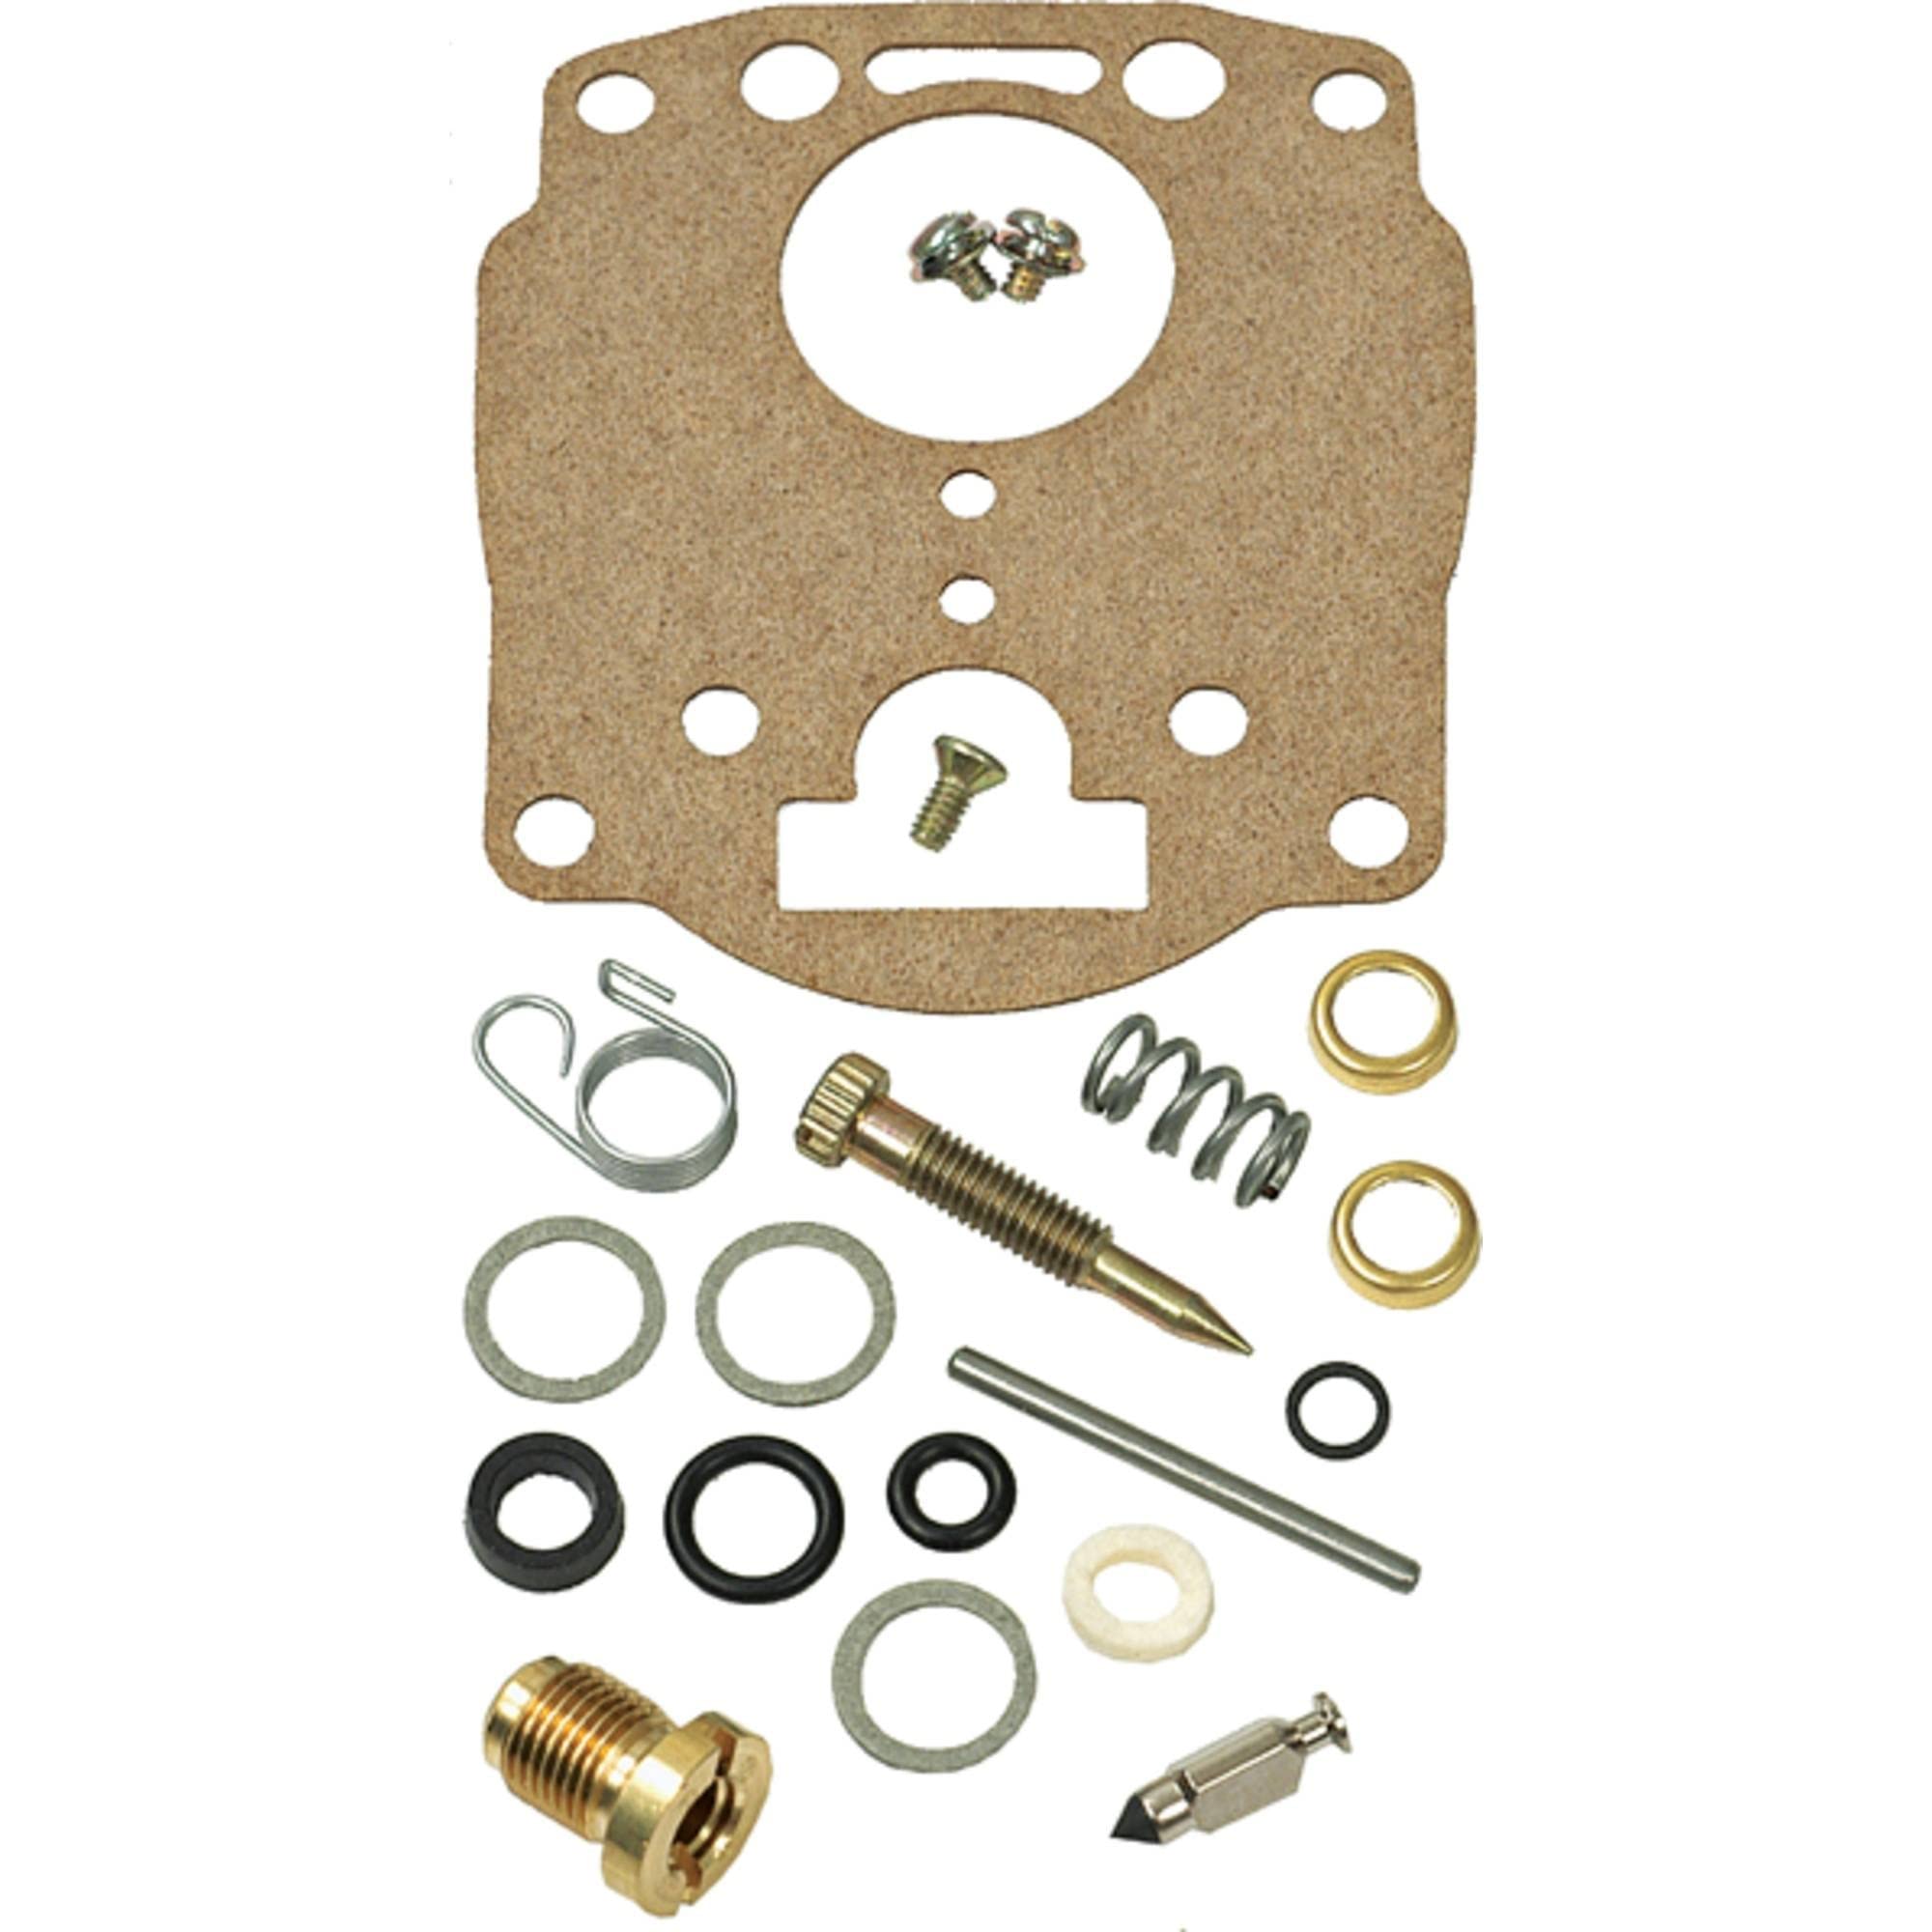 DB Electrical ZFS-K7519 Repair Kit Compatible with/Replacement for Marvel-Schebler Carburetors